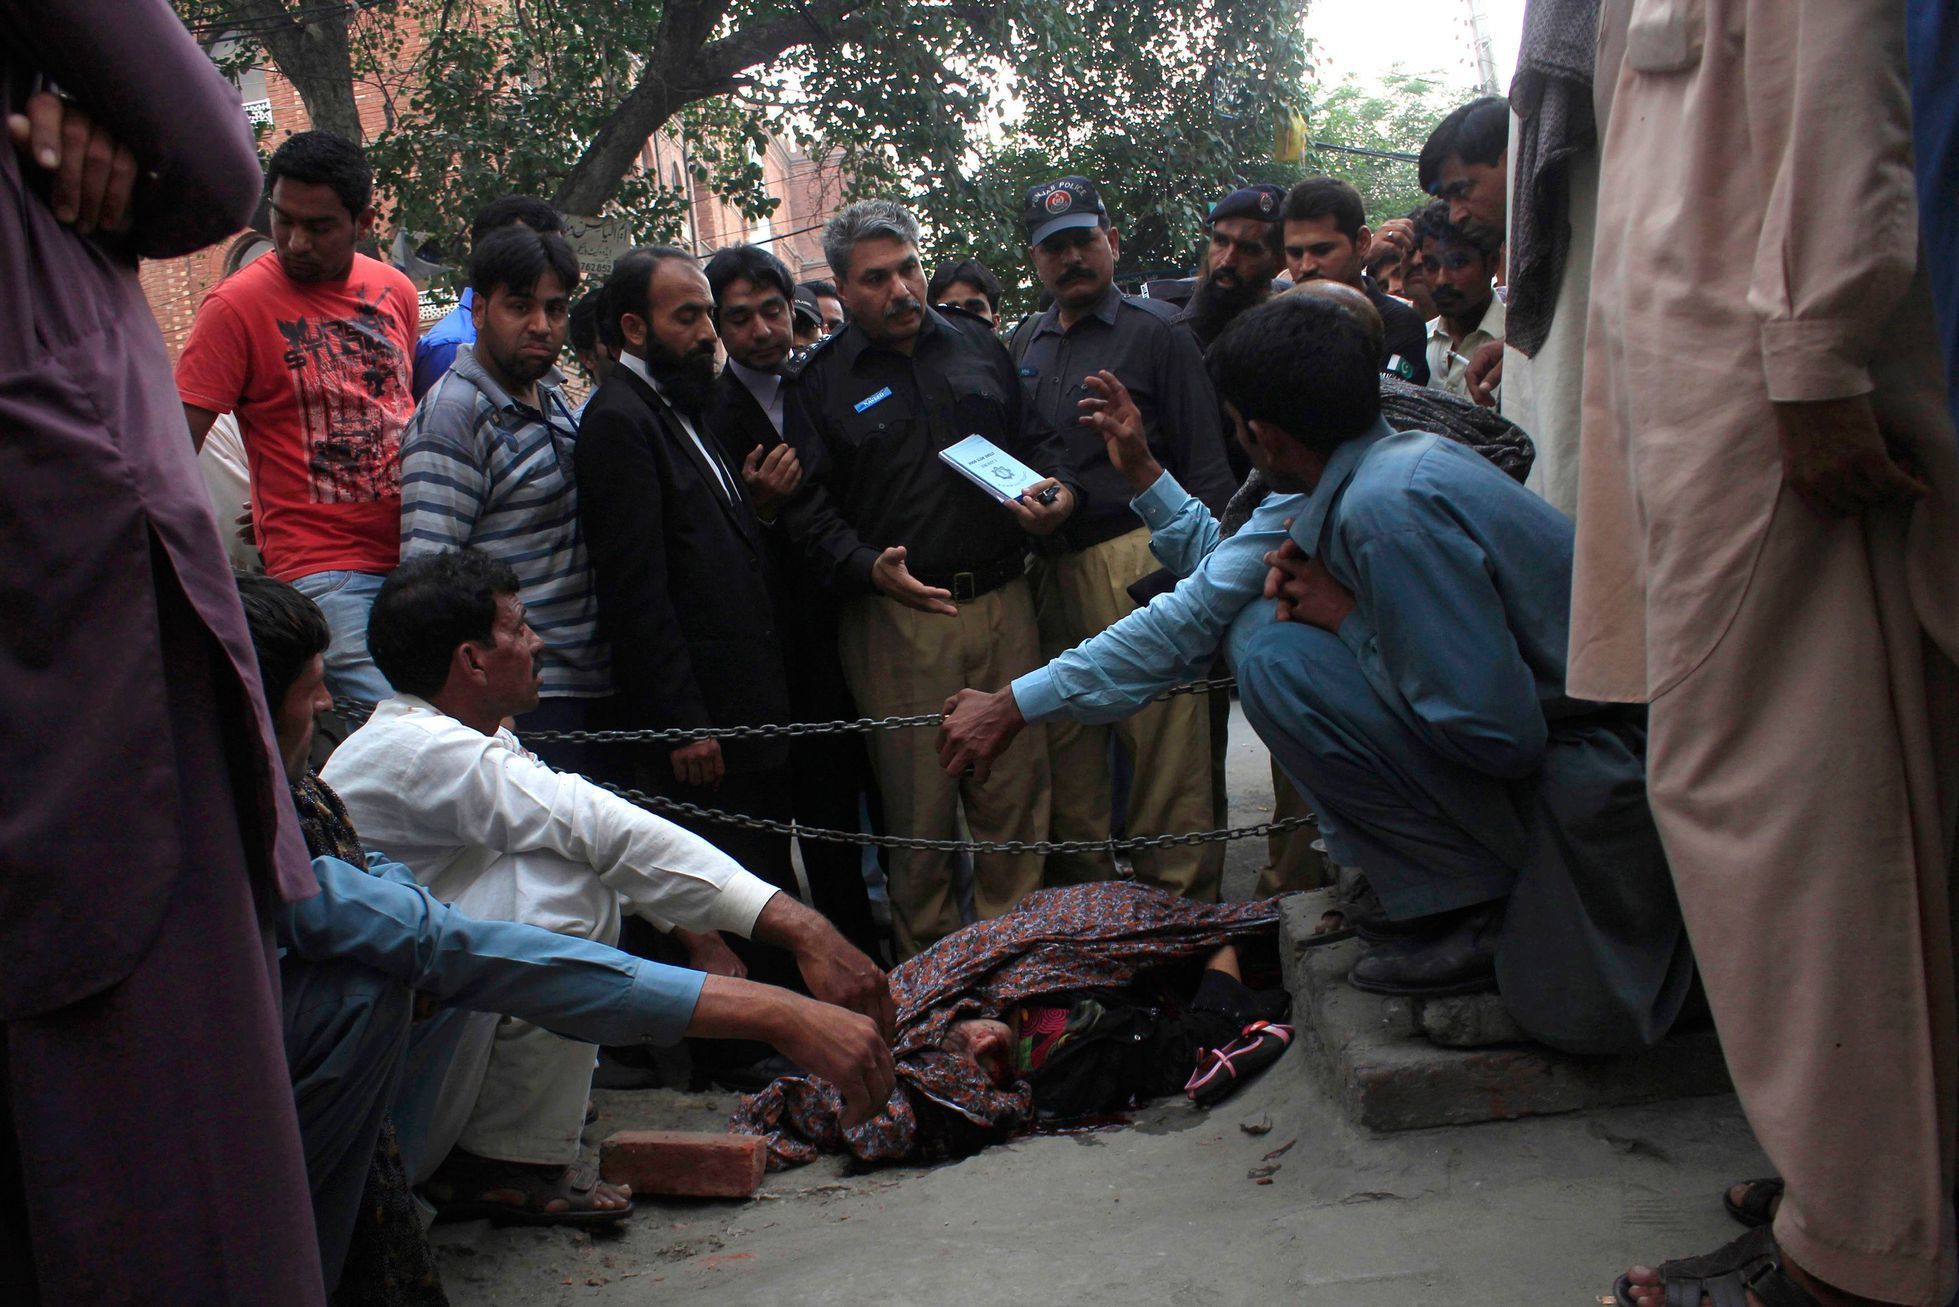 File photo of police collecting evidence near the body of Iqbal, who was killed by family members, at the site near the Lahore High Court building in Lahore file photo